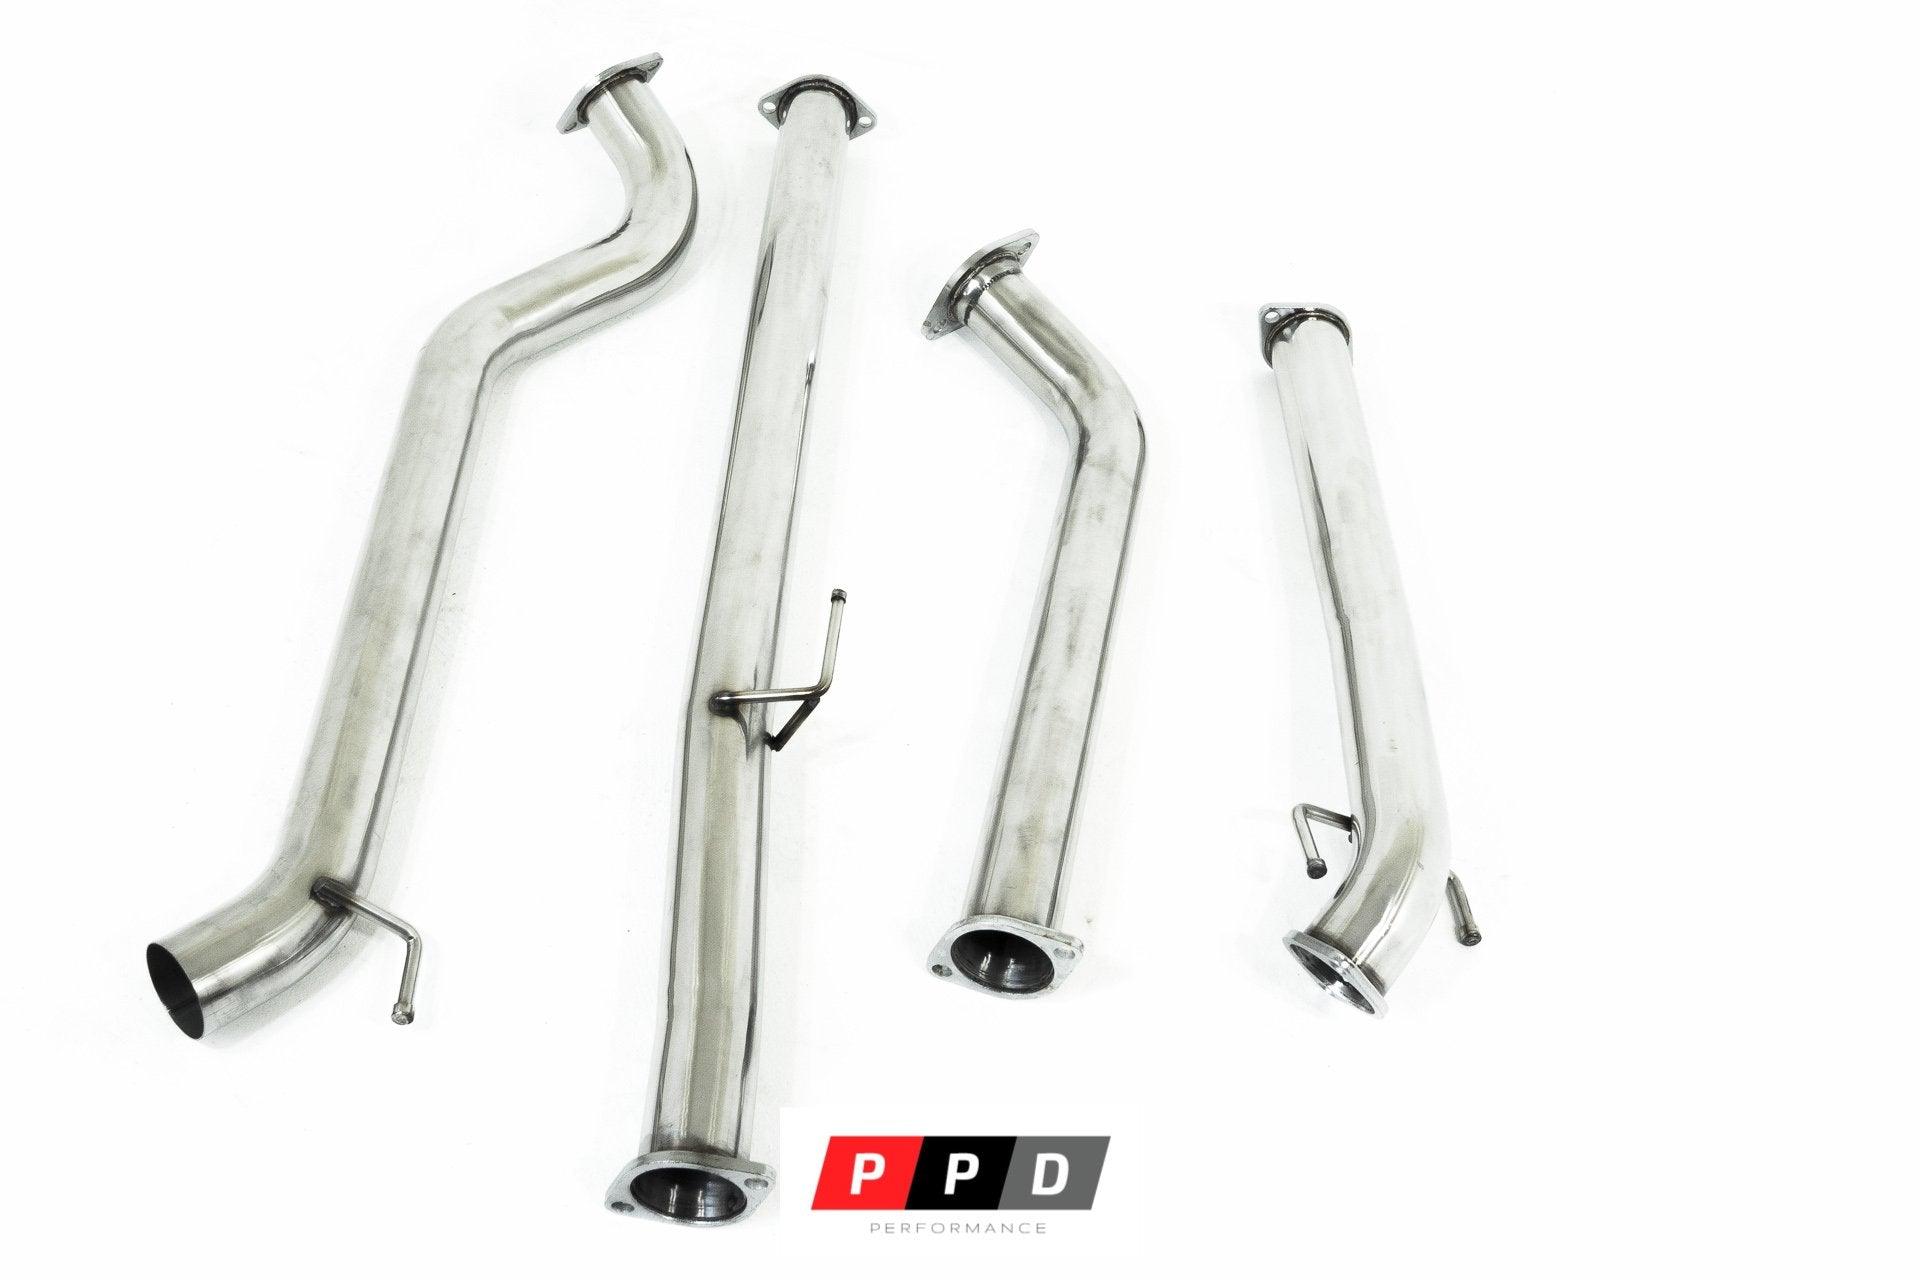 PPD Performance - Toyota Hilux (2015+) GUN 2.8L TD DPF Back Stainless Steel Exhaust Upgrade - 4X4OC™